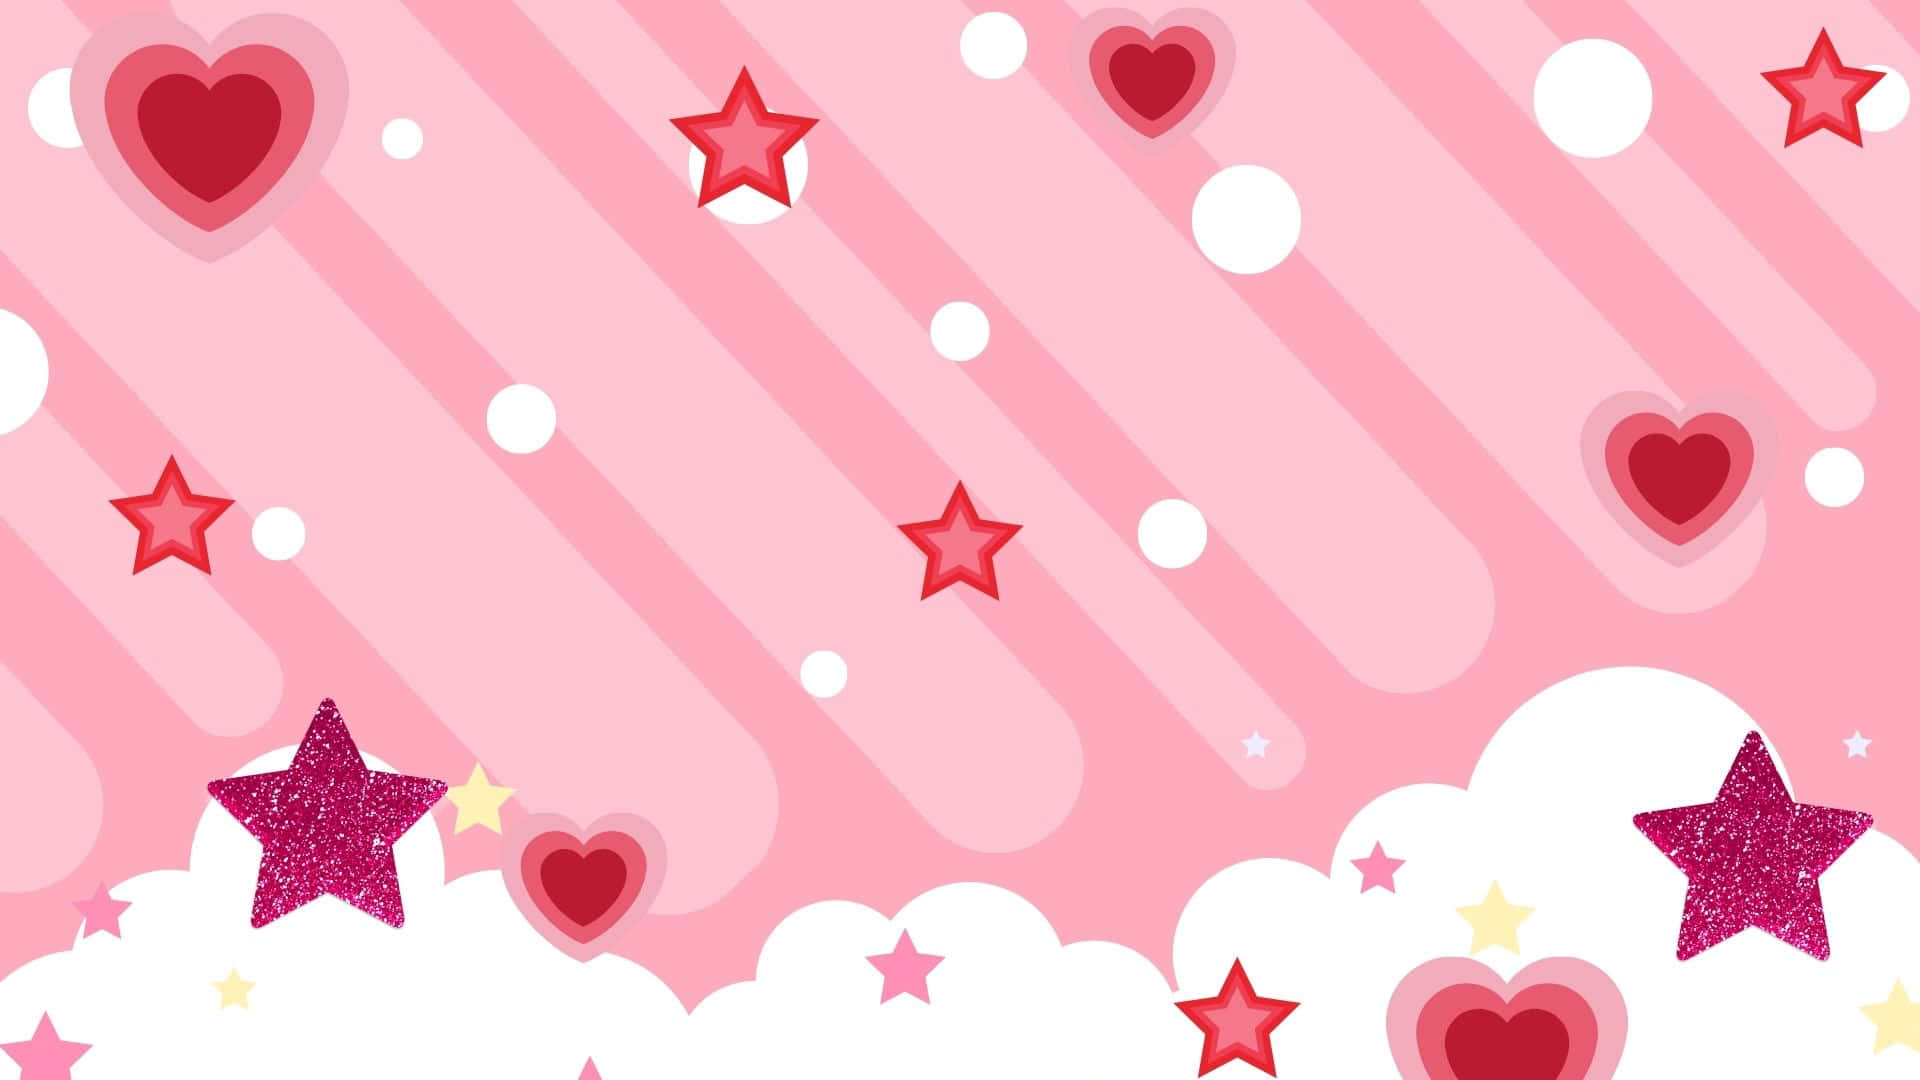 A vibrant background of pink and red